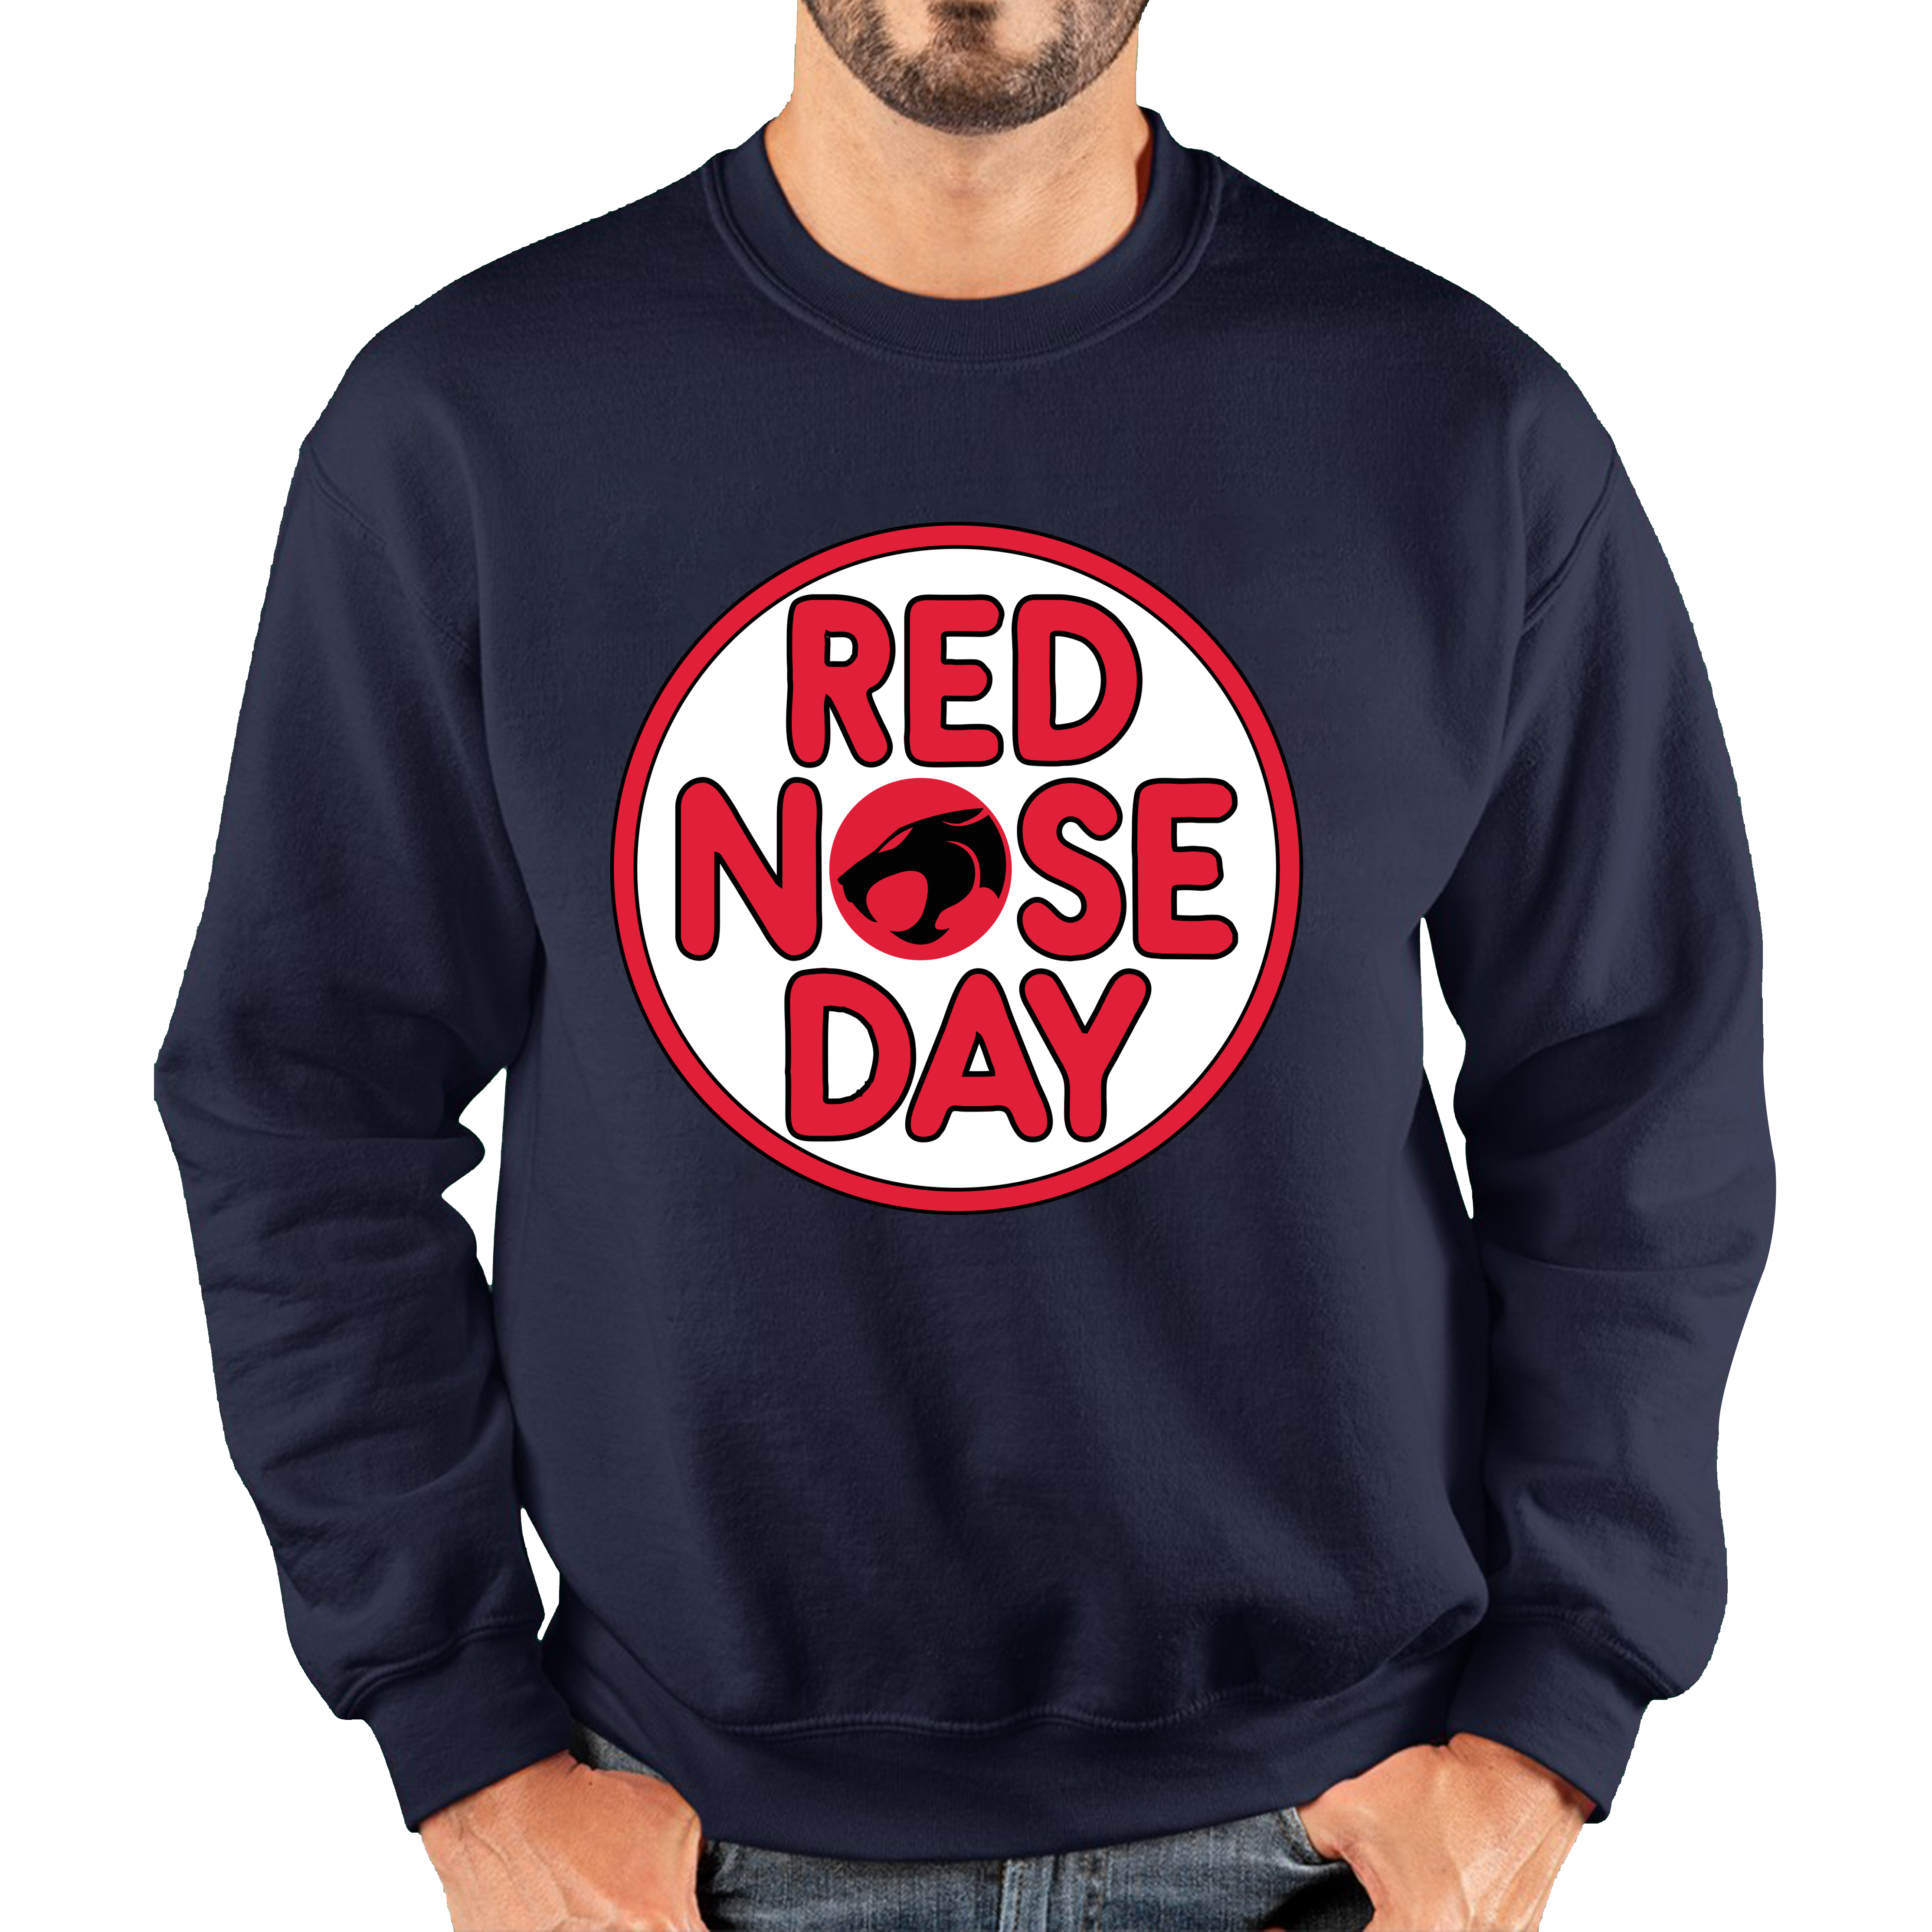 Thundercat Red Nose Day Adult Sweatshirt. 50% Goes To Charity